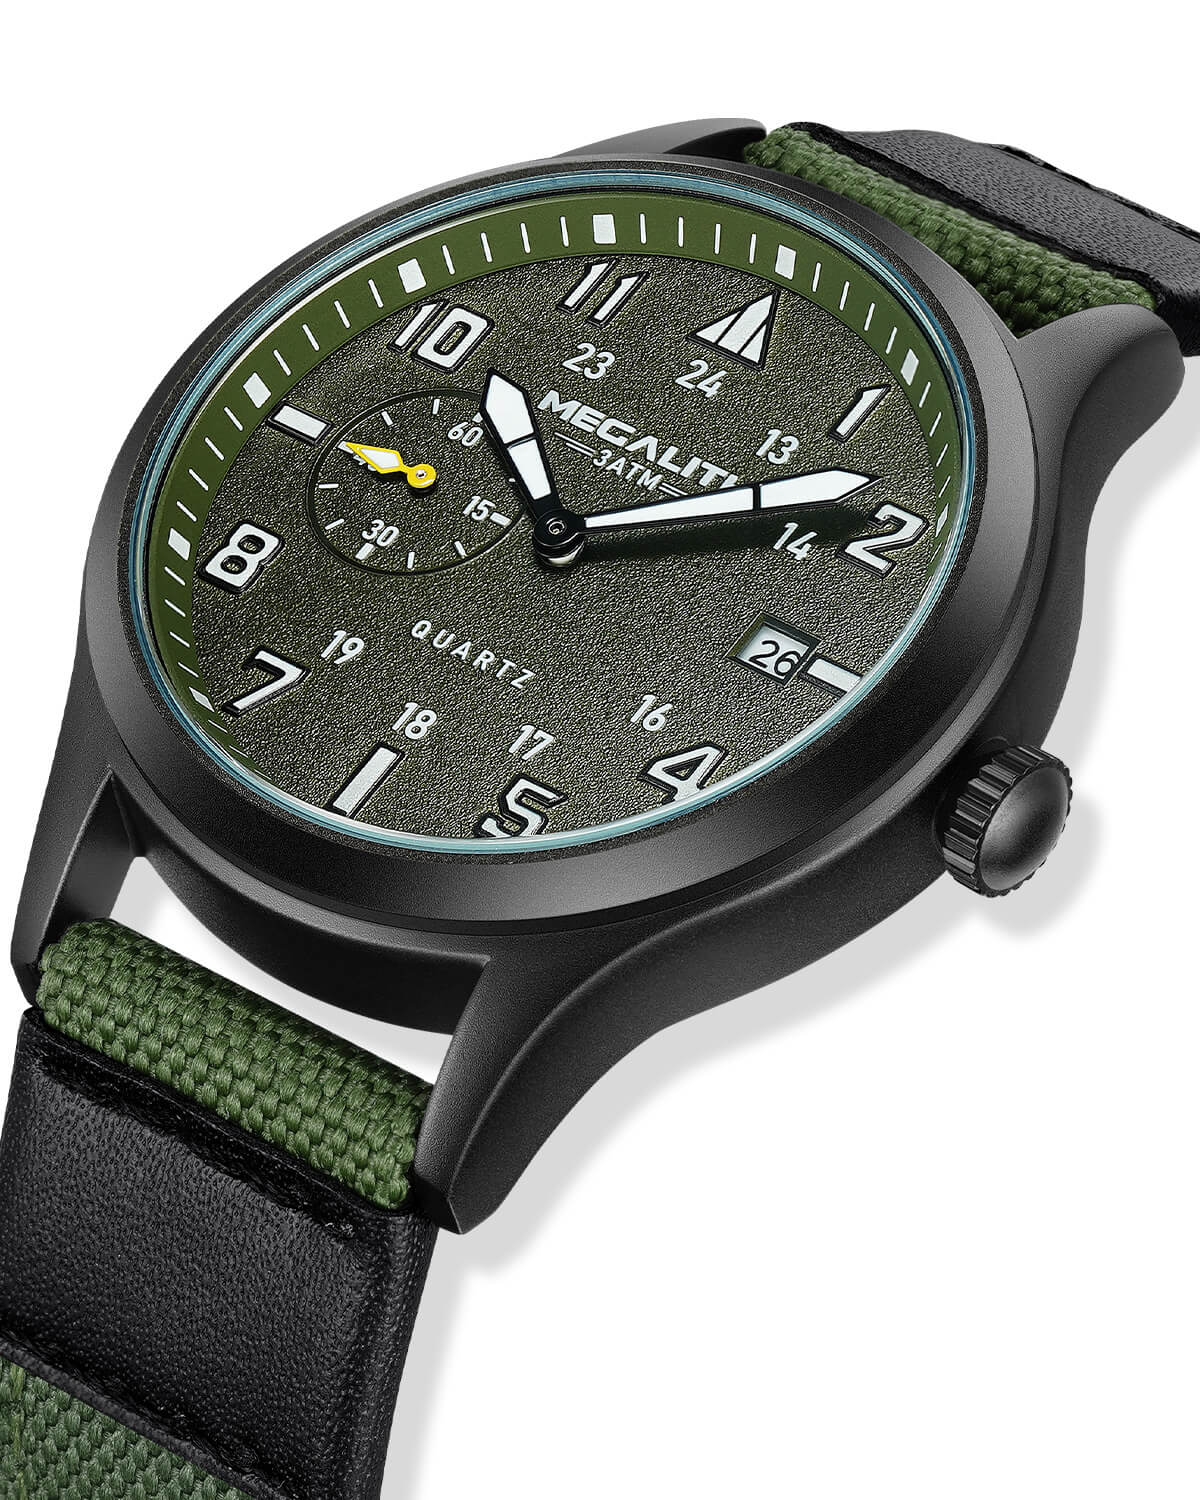 Megalith 8282M-megalith watch